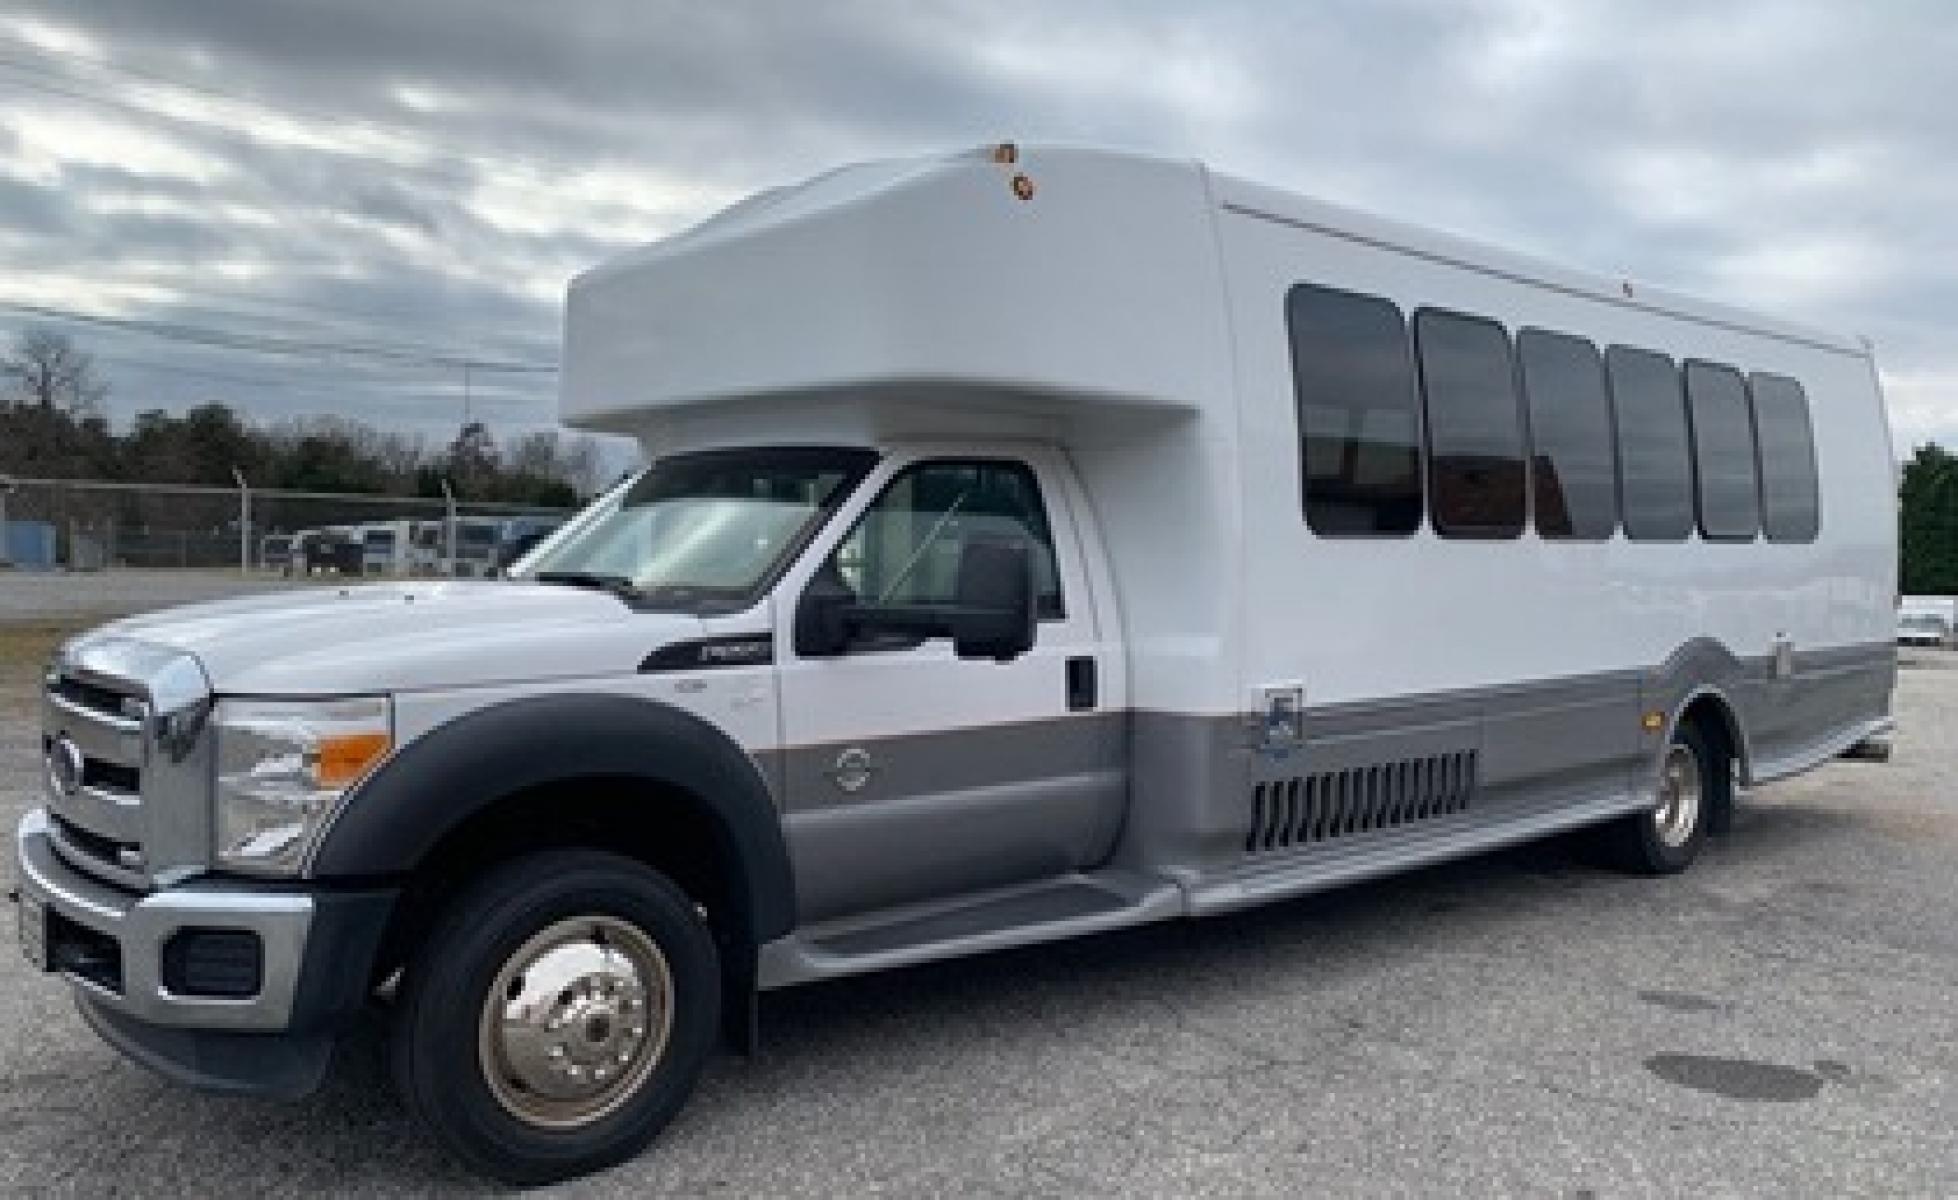 2014 White Ford F550 with an 6.7L engine, Auto transmission, 0.000000, 0.000000 - 2014 Ford F-550, Turtle Top Odyssey XL,- 6.7L Diesel Engine,- Automatic Trans,- Electric Entrance,Door,- 25 Passengers & Driver,- Mid Back Reclining Seats,- Retractable Seat Belts, - 110V Outlets,- Rear Dedicated Luggage,- Stainless Wheel Simulators,- Front and Rear A/C. - Photo #2